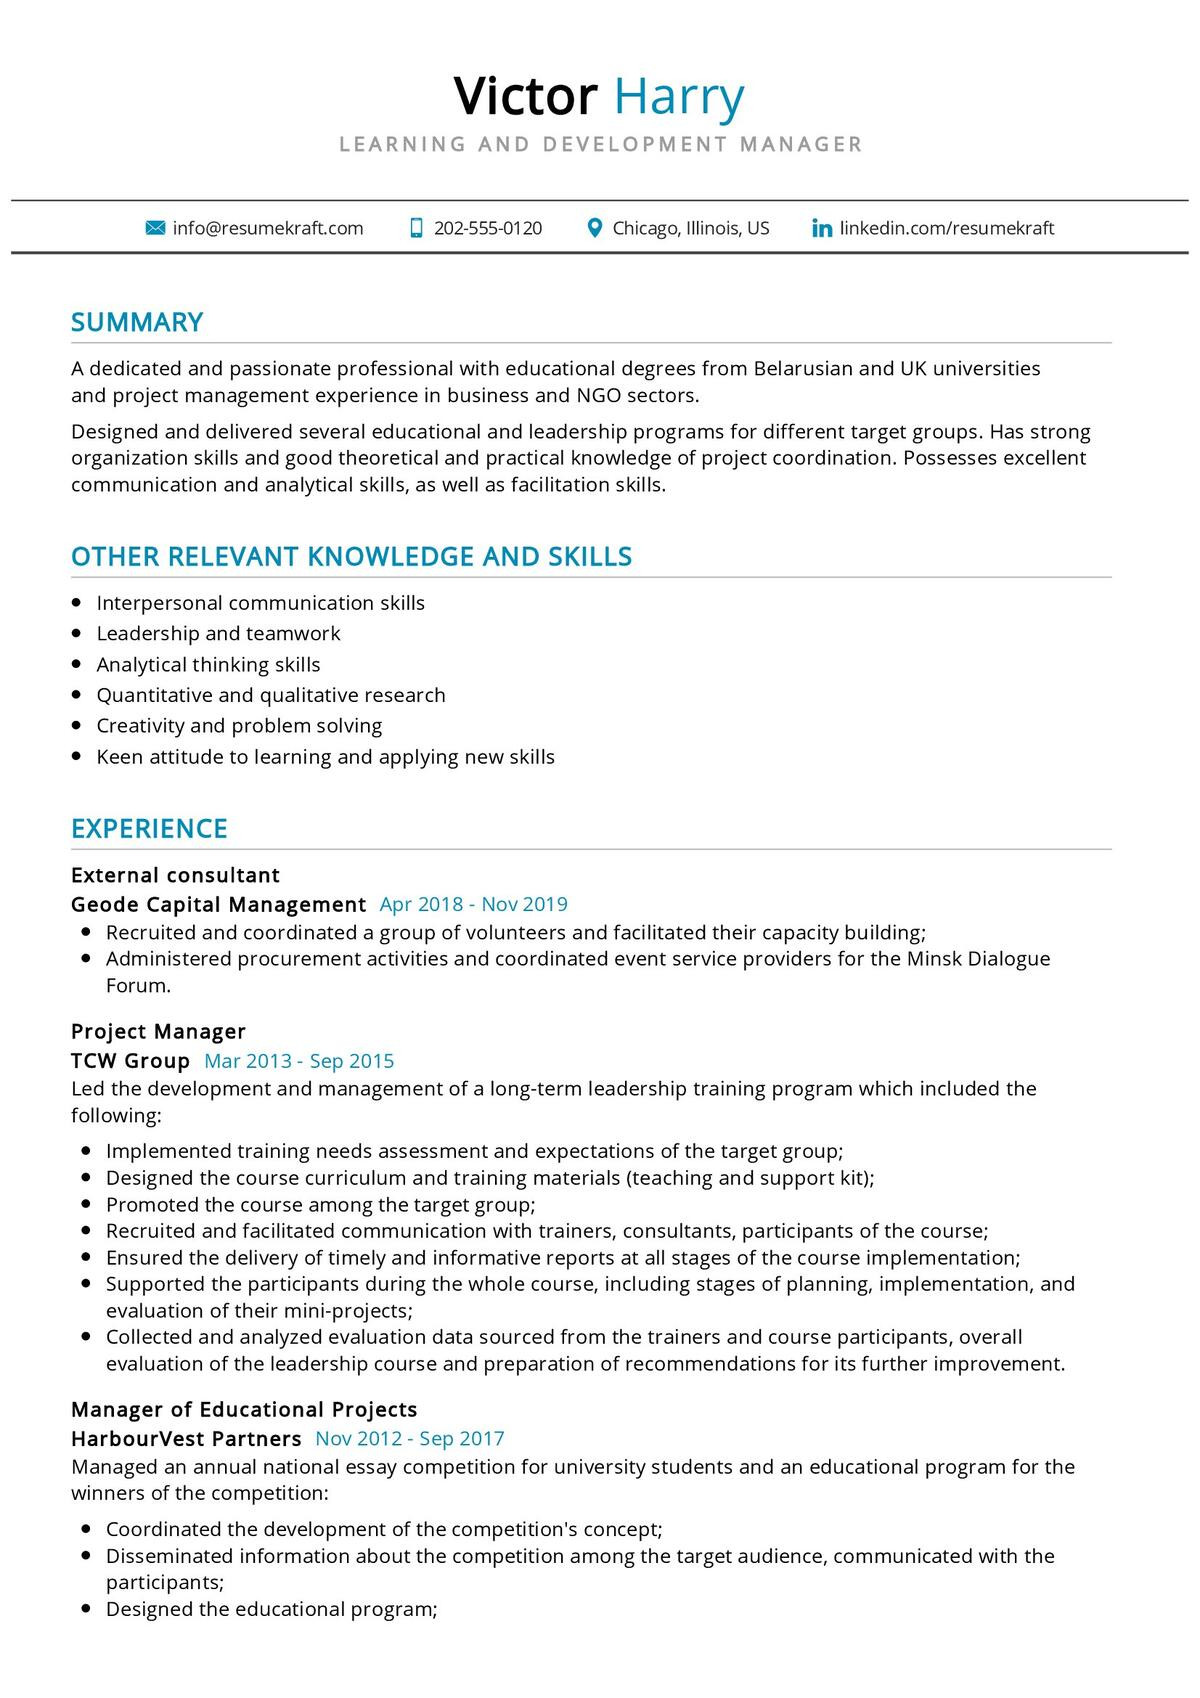 Application Development and Manager and Resume Not Sample Learning and Development Manager Resume 2021 Writing Guide …